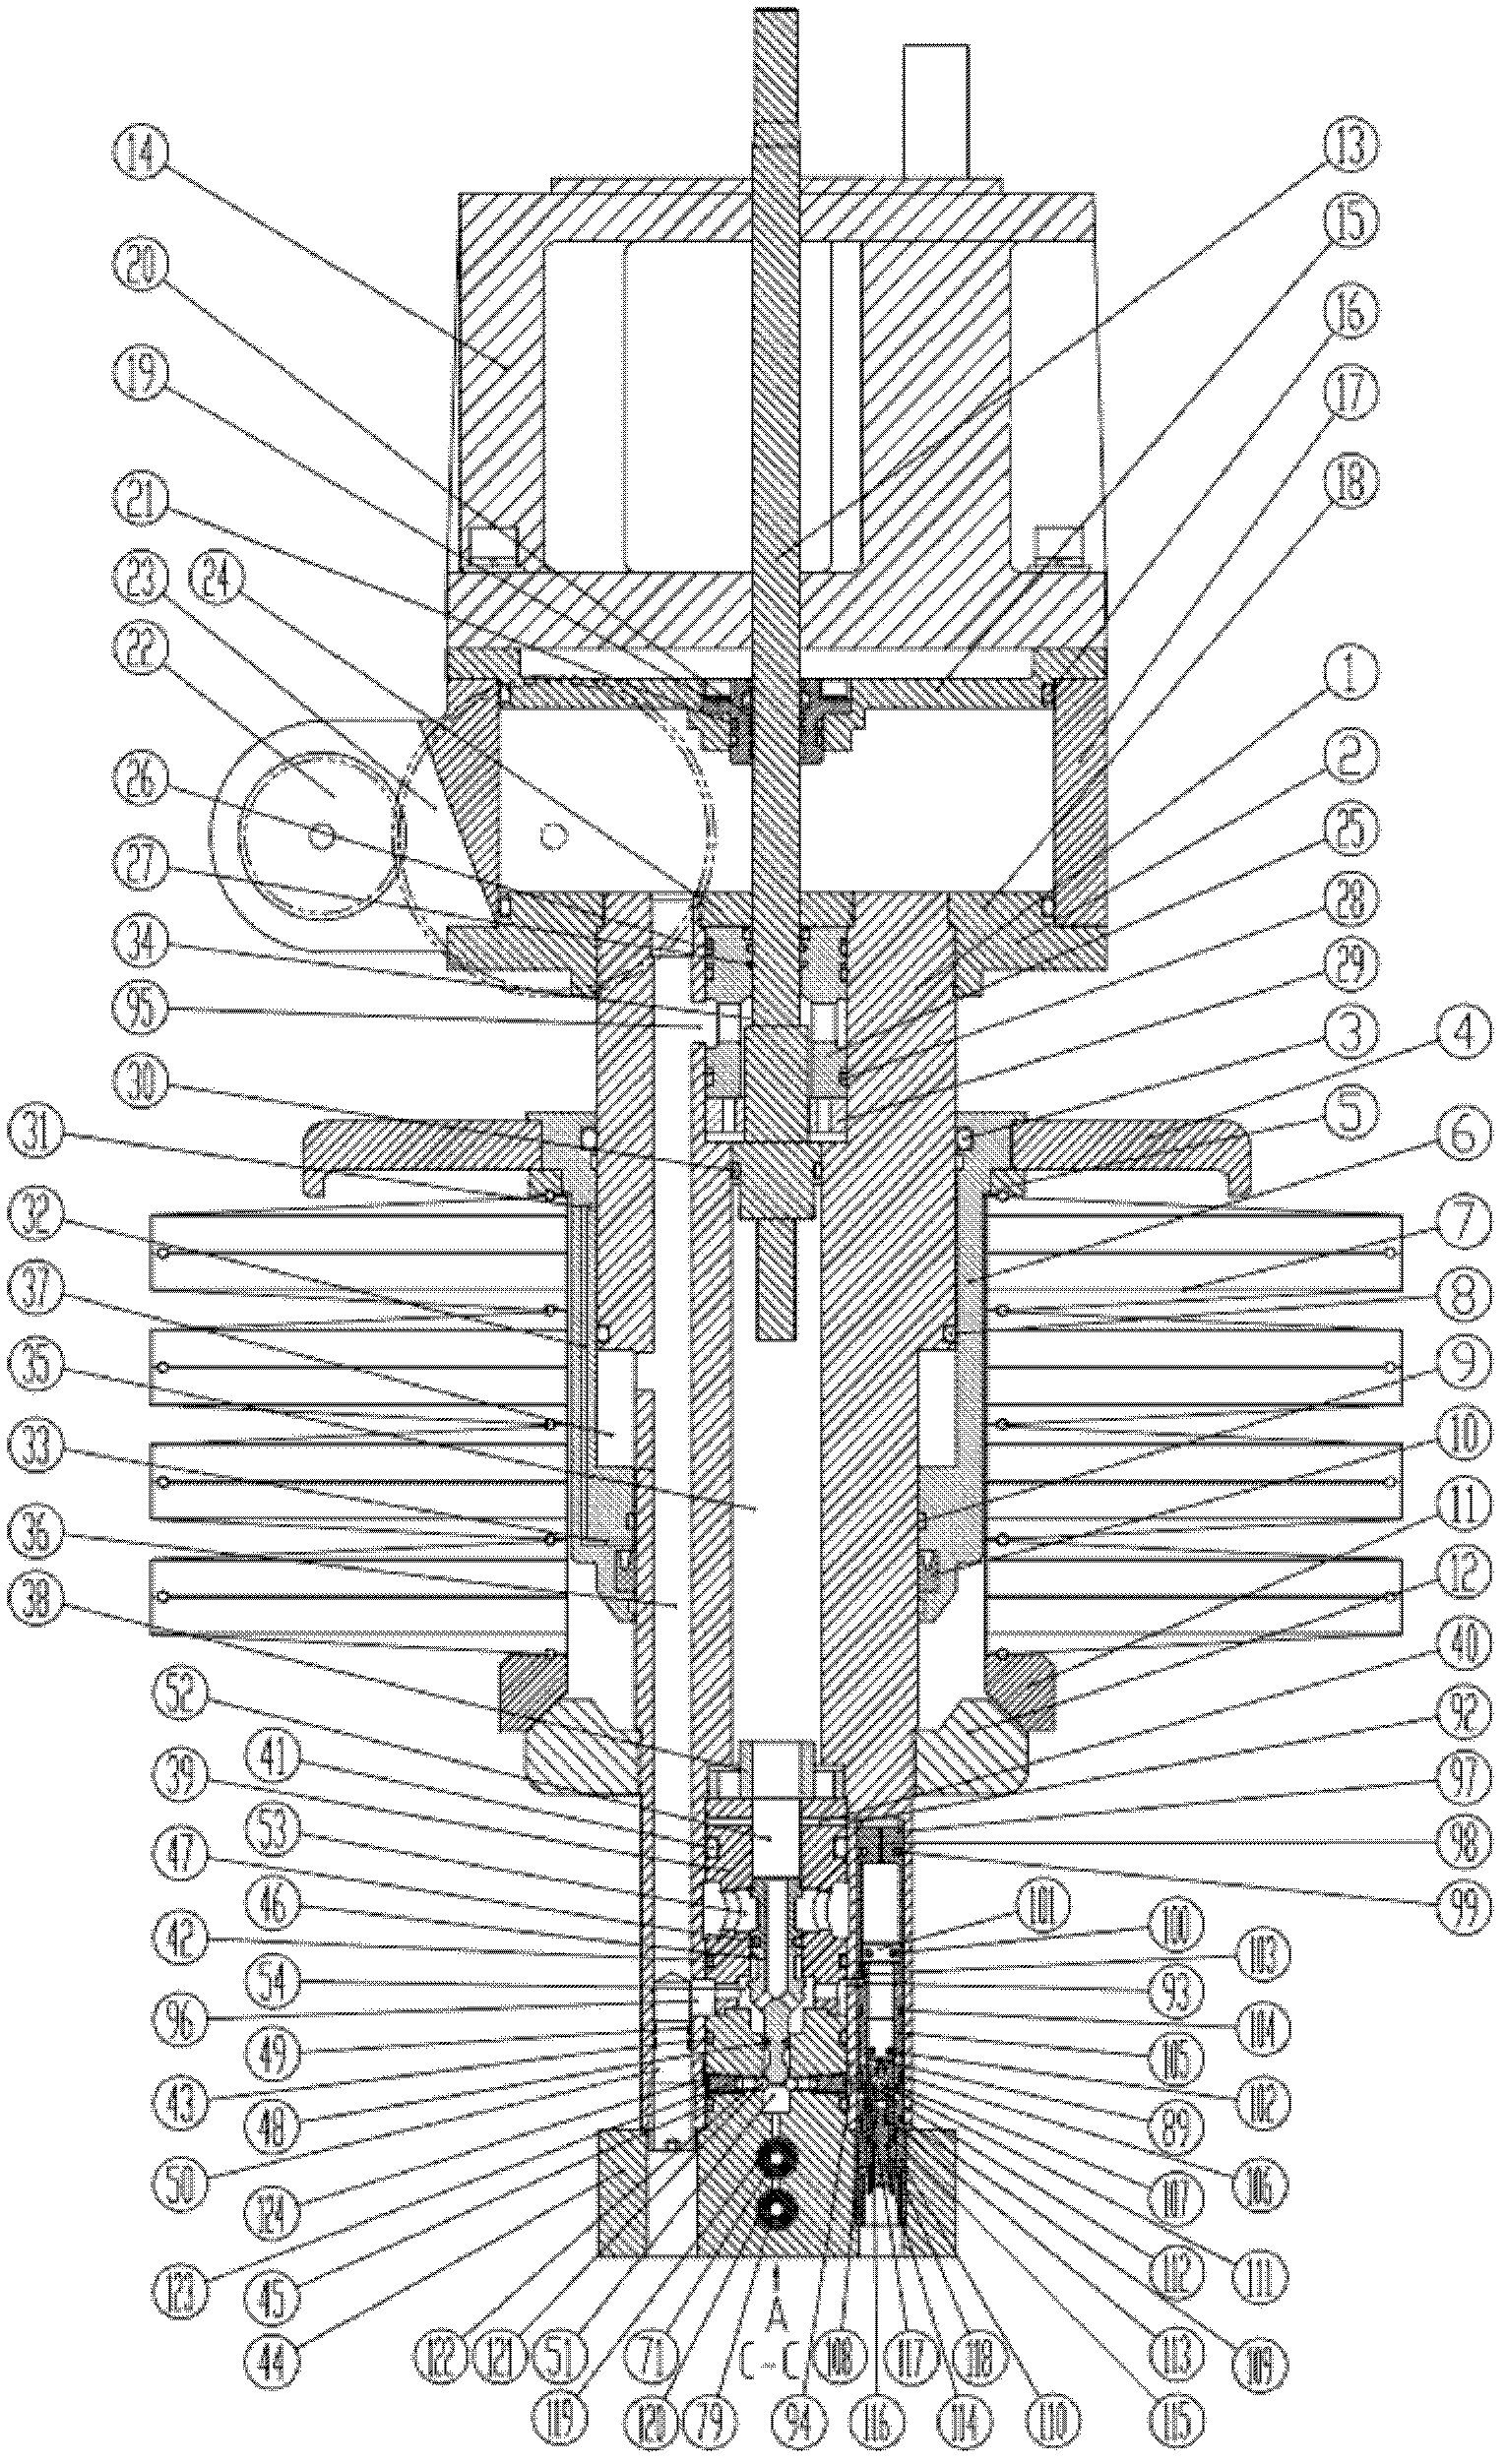 Working cylinder integrated with control valve and high-power hydraulic spring operating mechanism